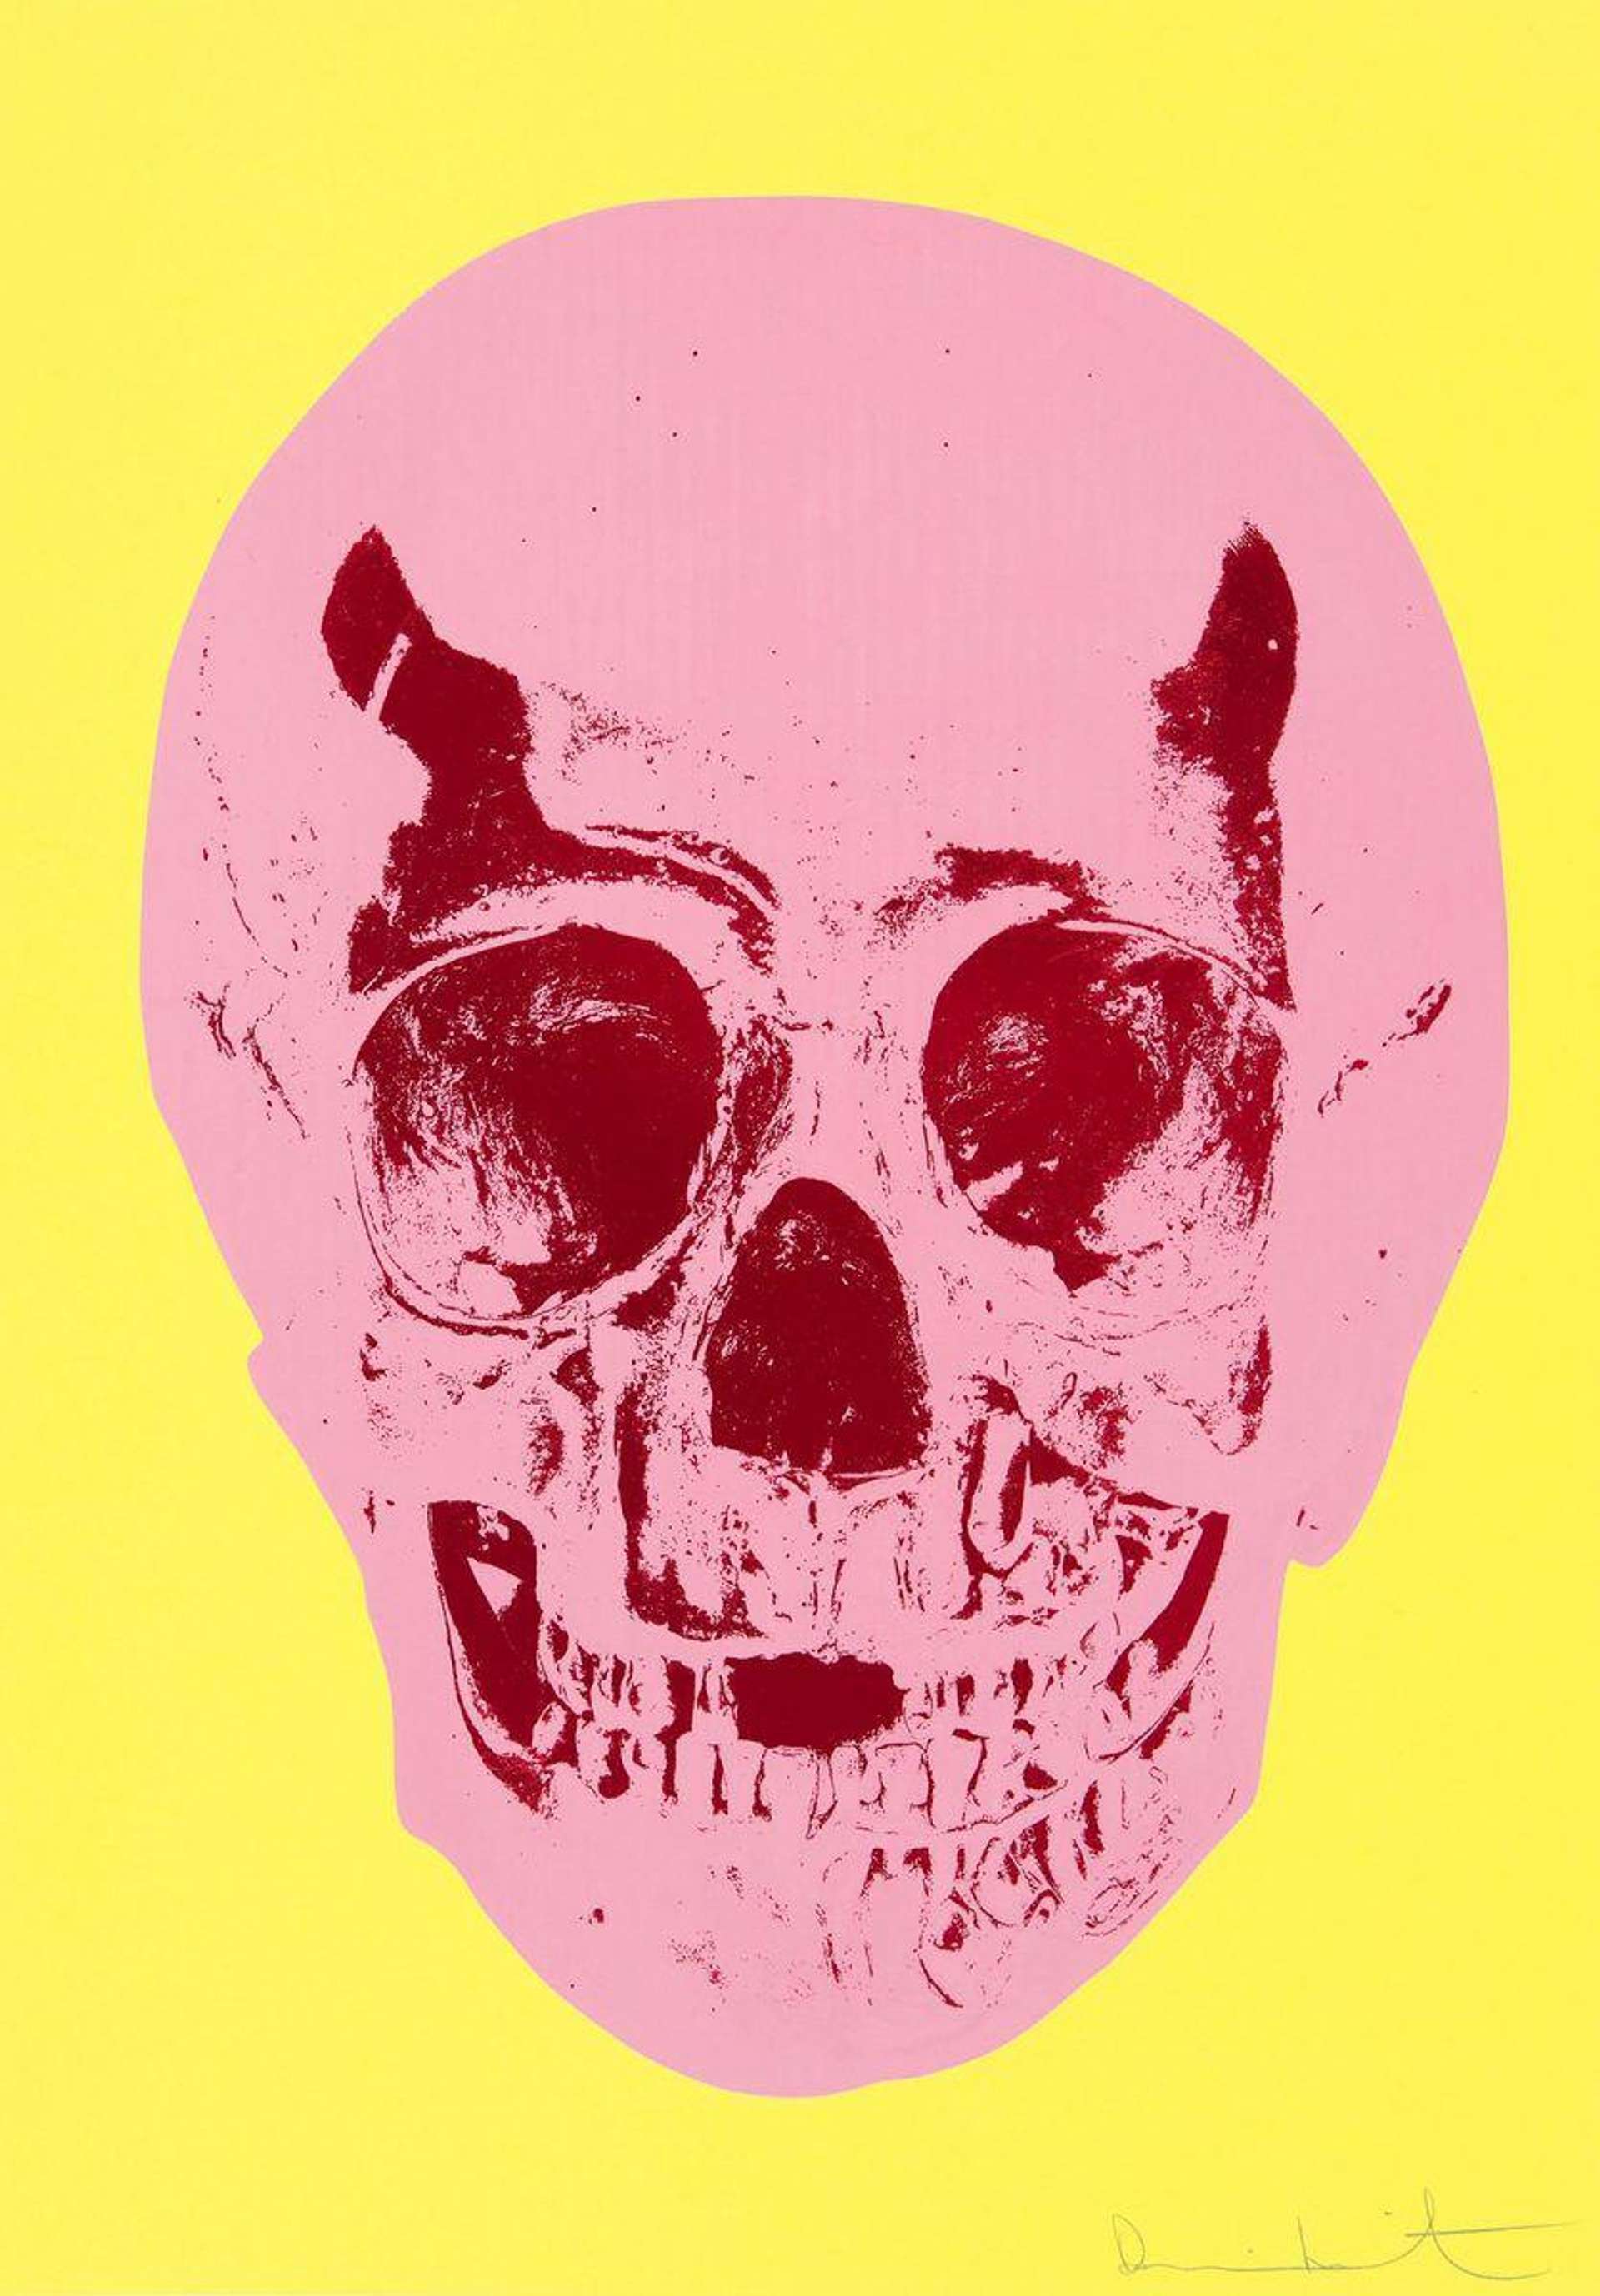 Damien Hirst: Till Death Do Us Part (heaven lemon yellow pigment, pink, chilli red) - Signed Print